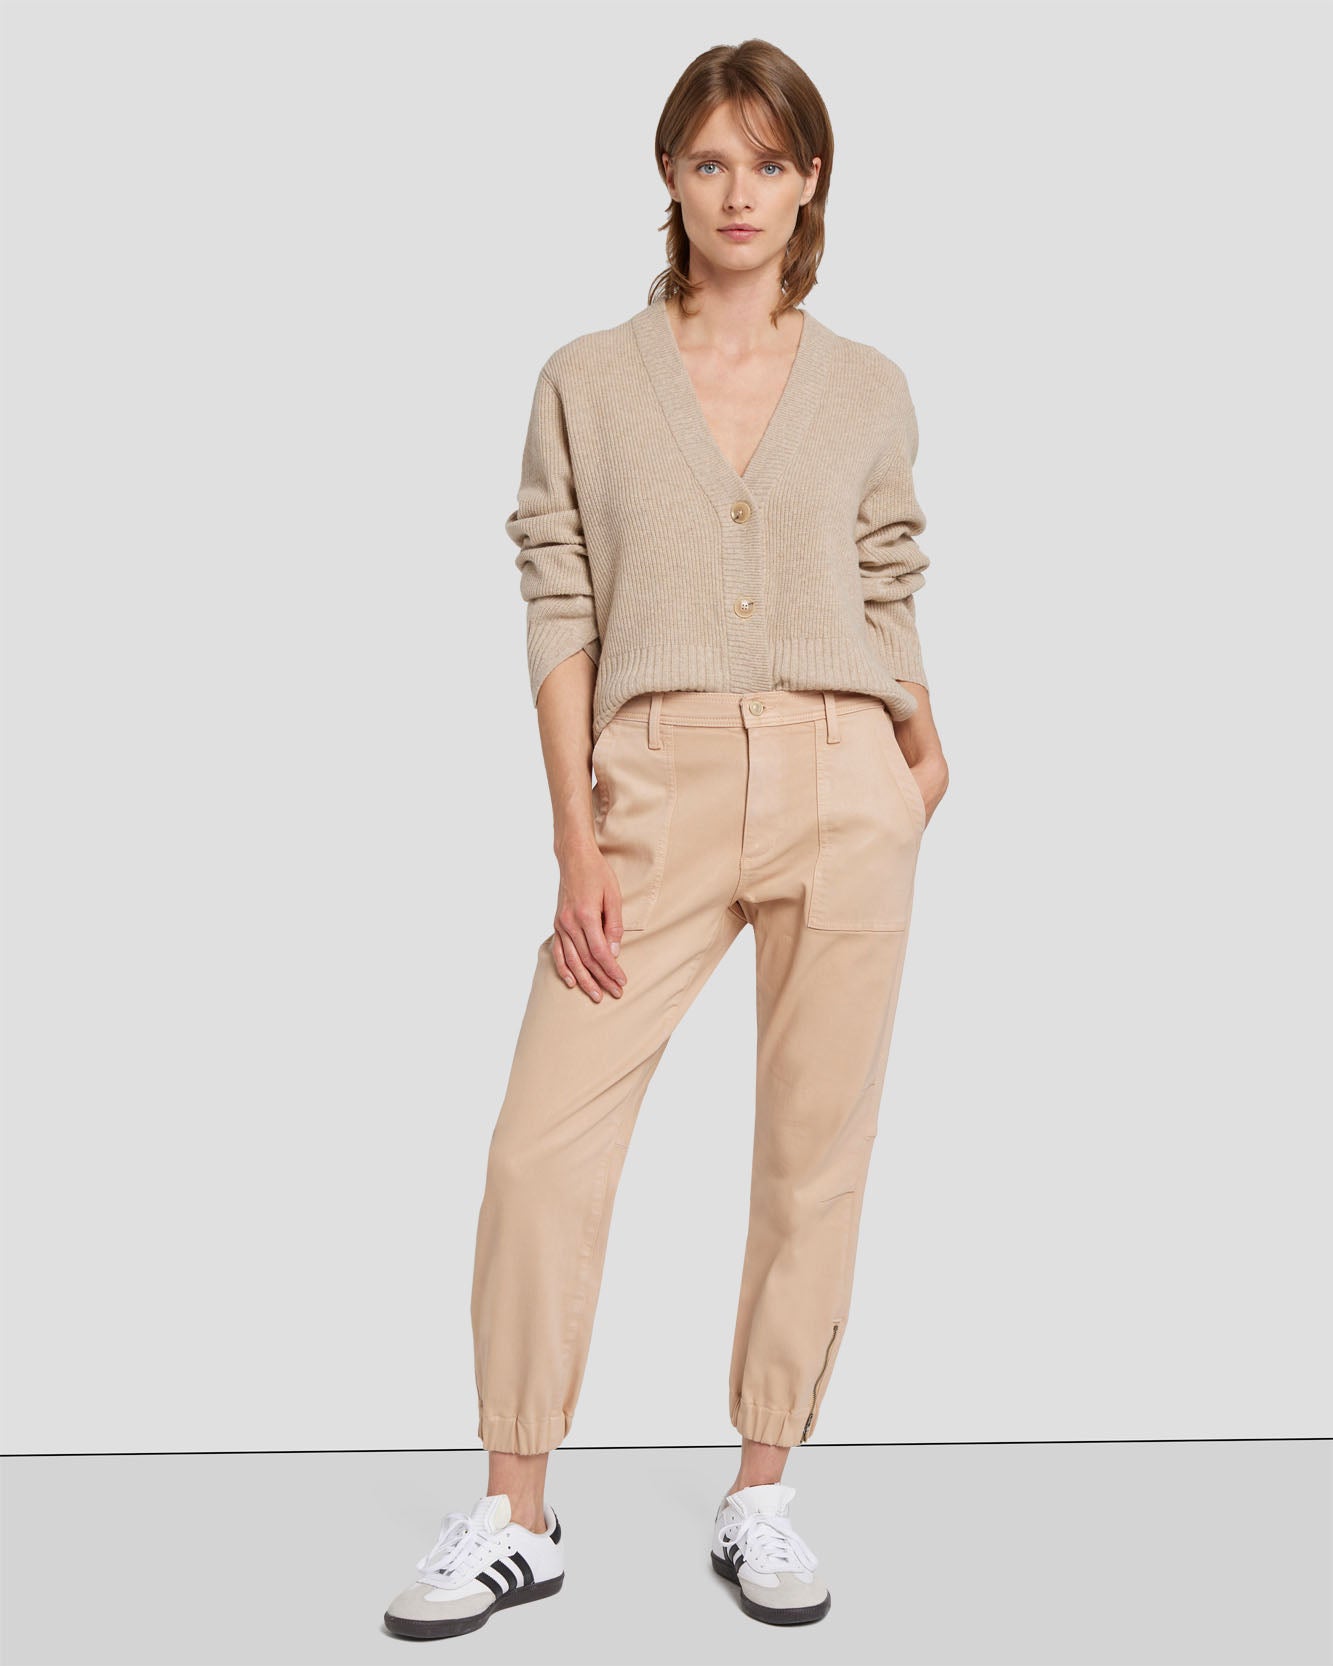 Darted Boyfriend Jogger in Coated Camel | 7 For All Mankind